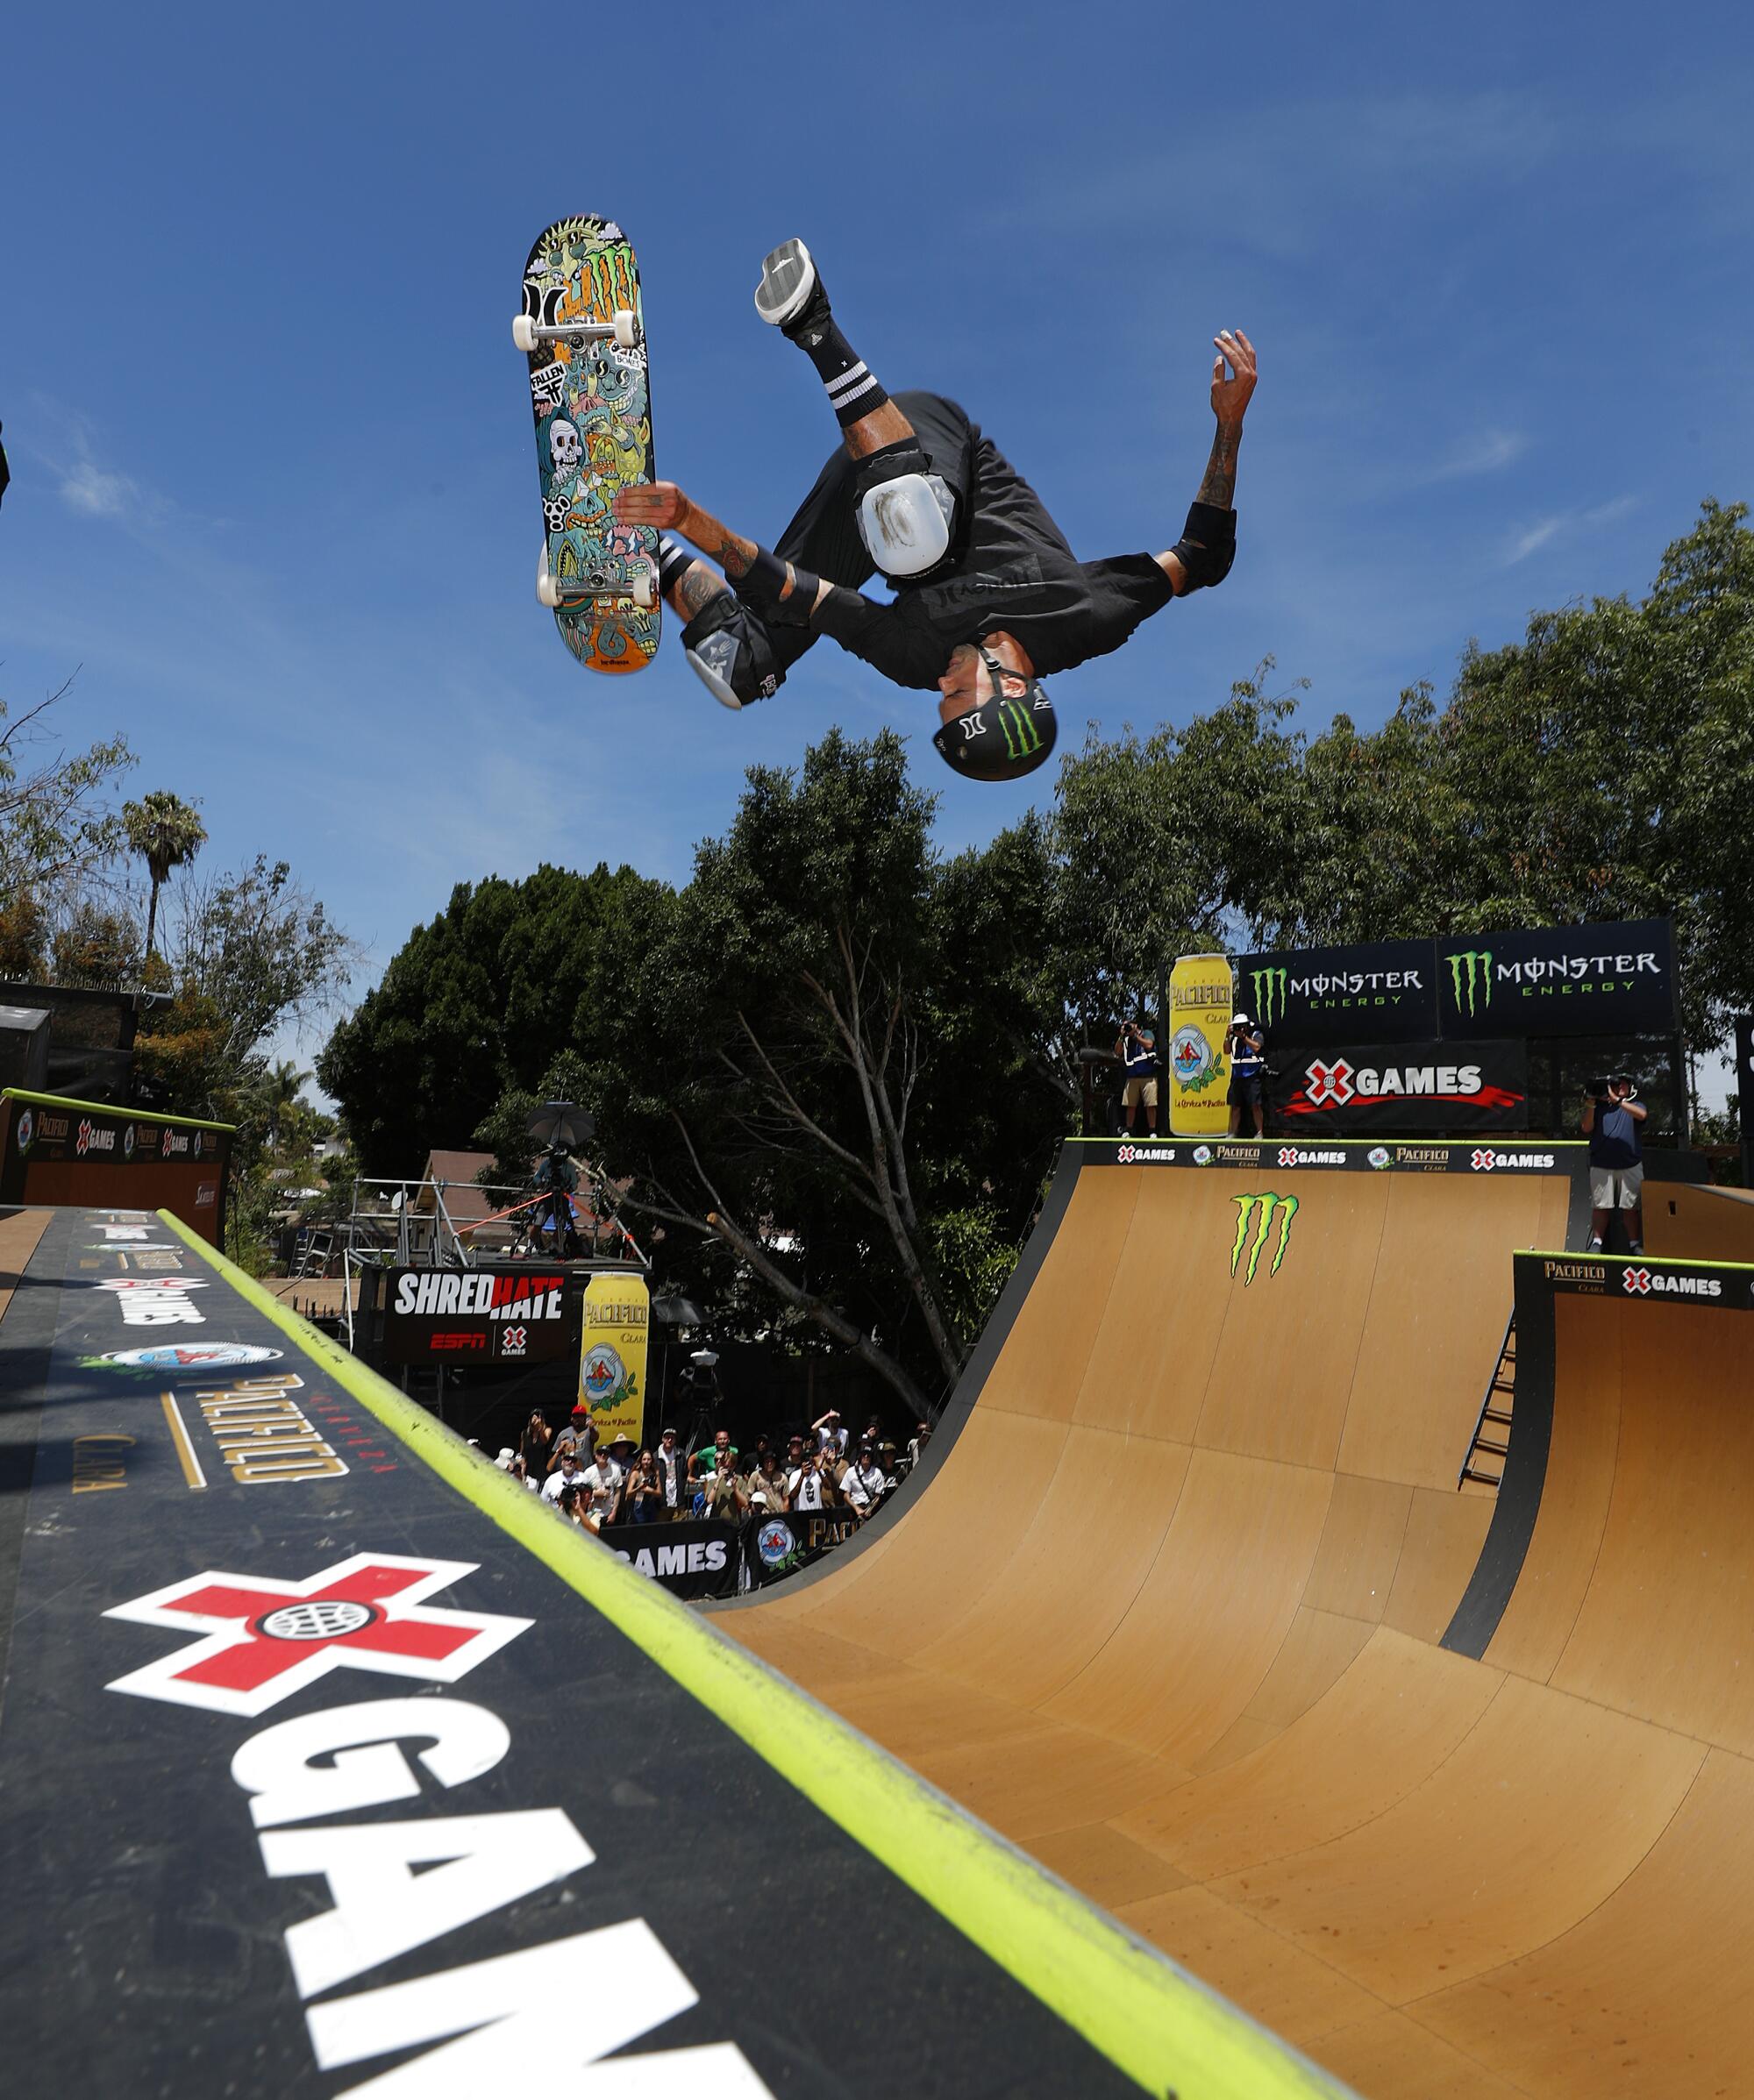 Elliot Sloan does a heelfilp 720 to win the gold medal in the skate vert trick competition in the X Games.